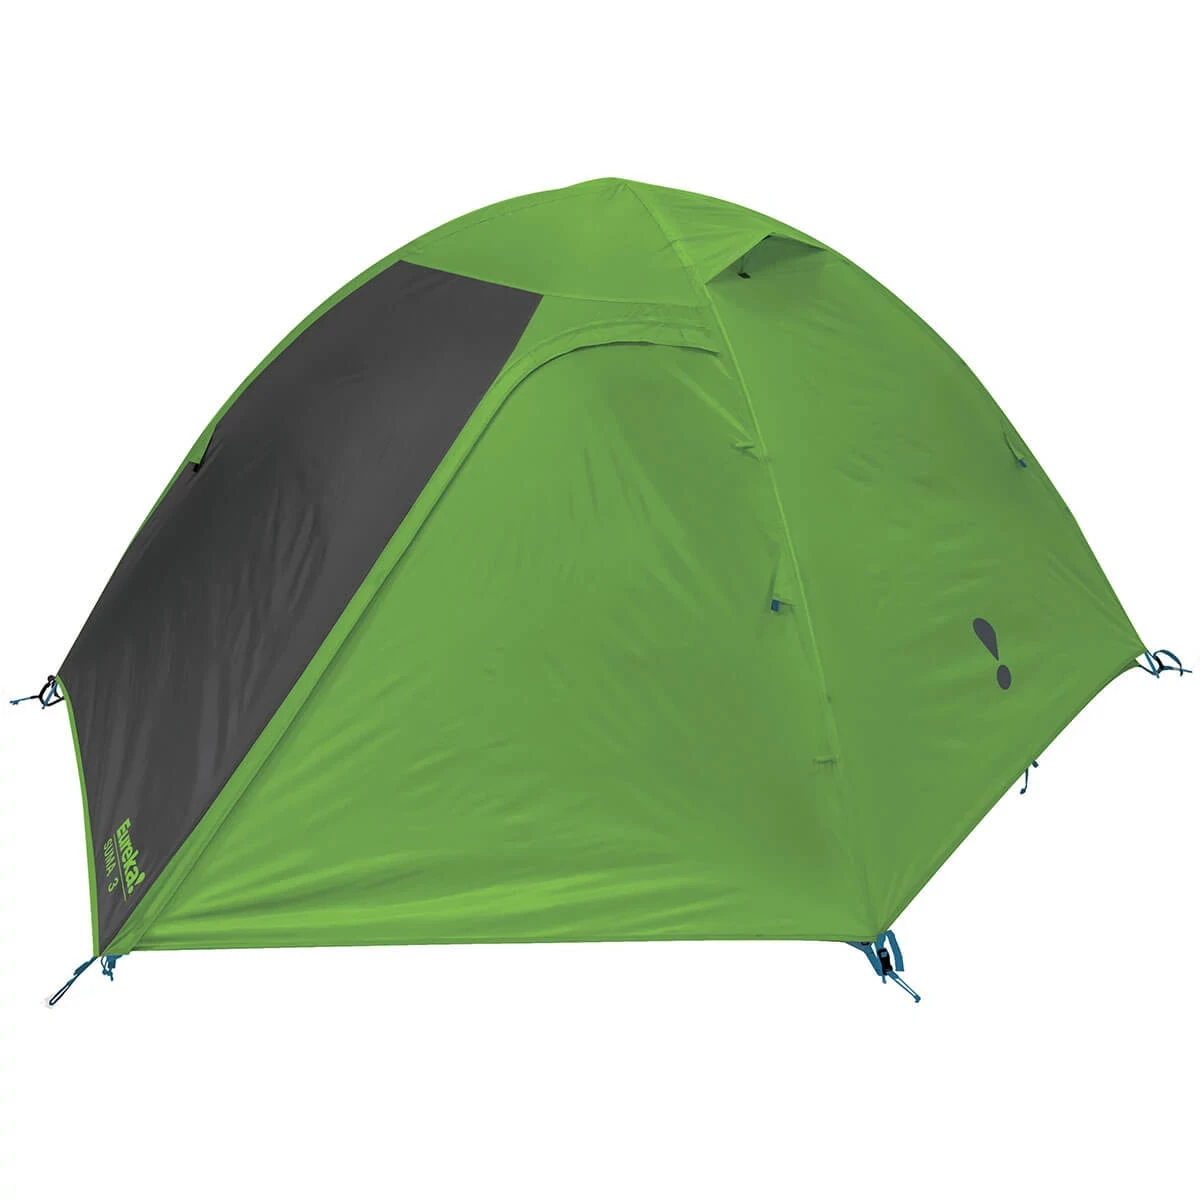 Suma 3 person tent with rainfly